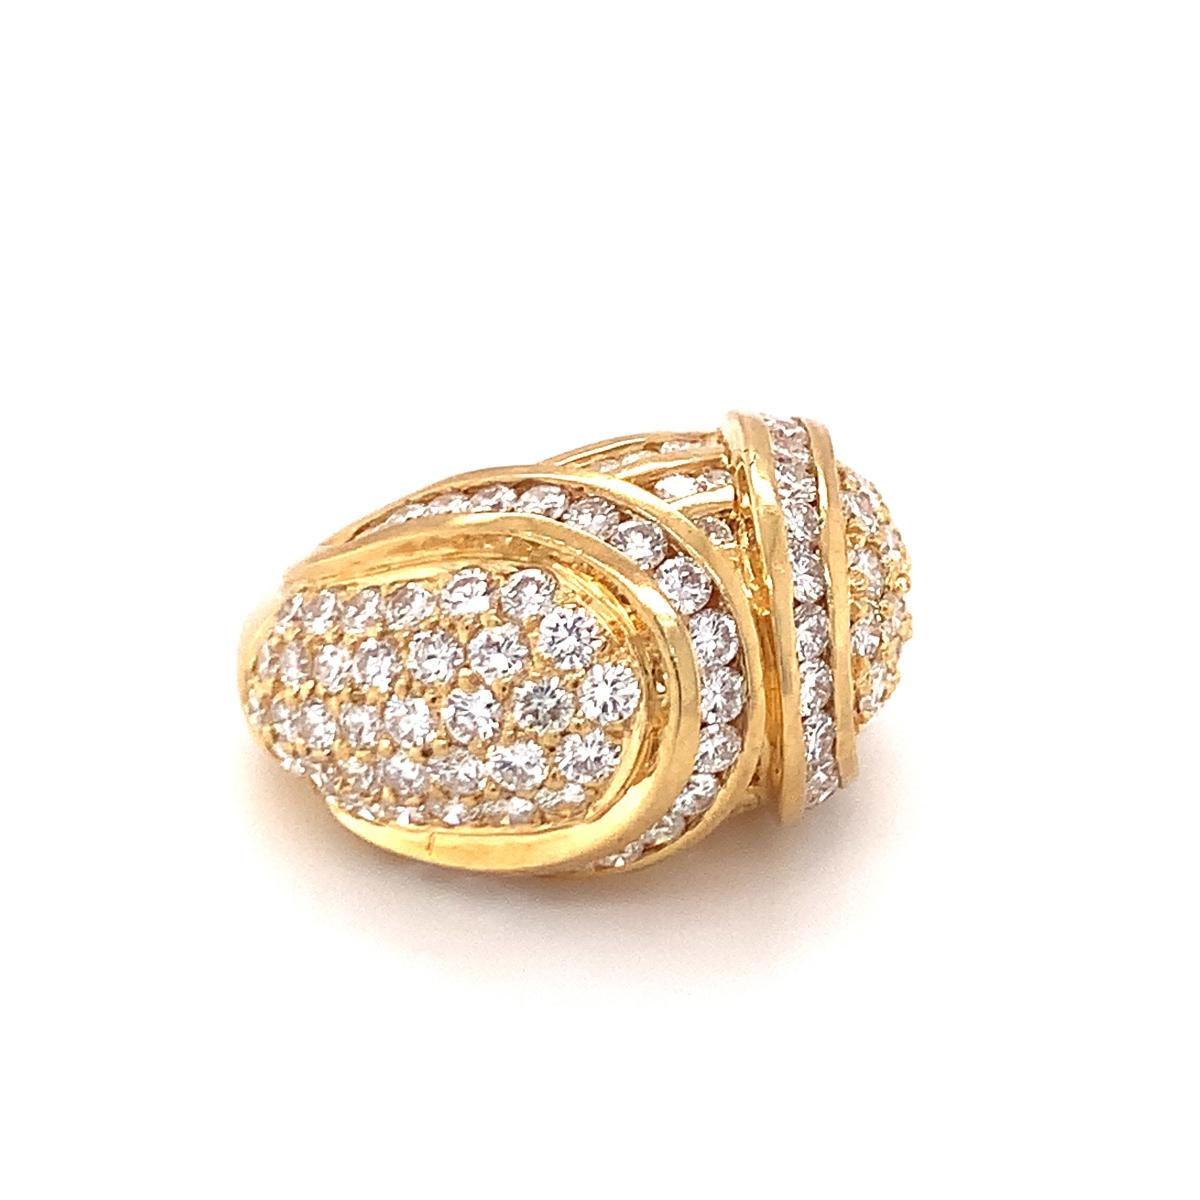 Pave Diamond Dome 18K Yellow Gold Ring, circa 1970s For Sale 3